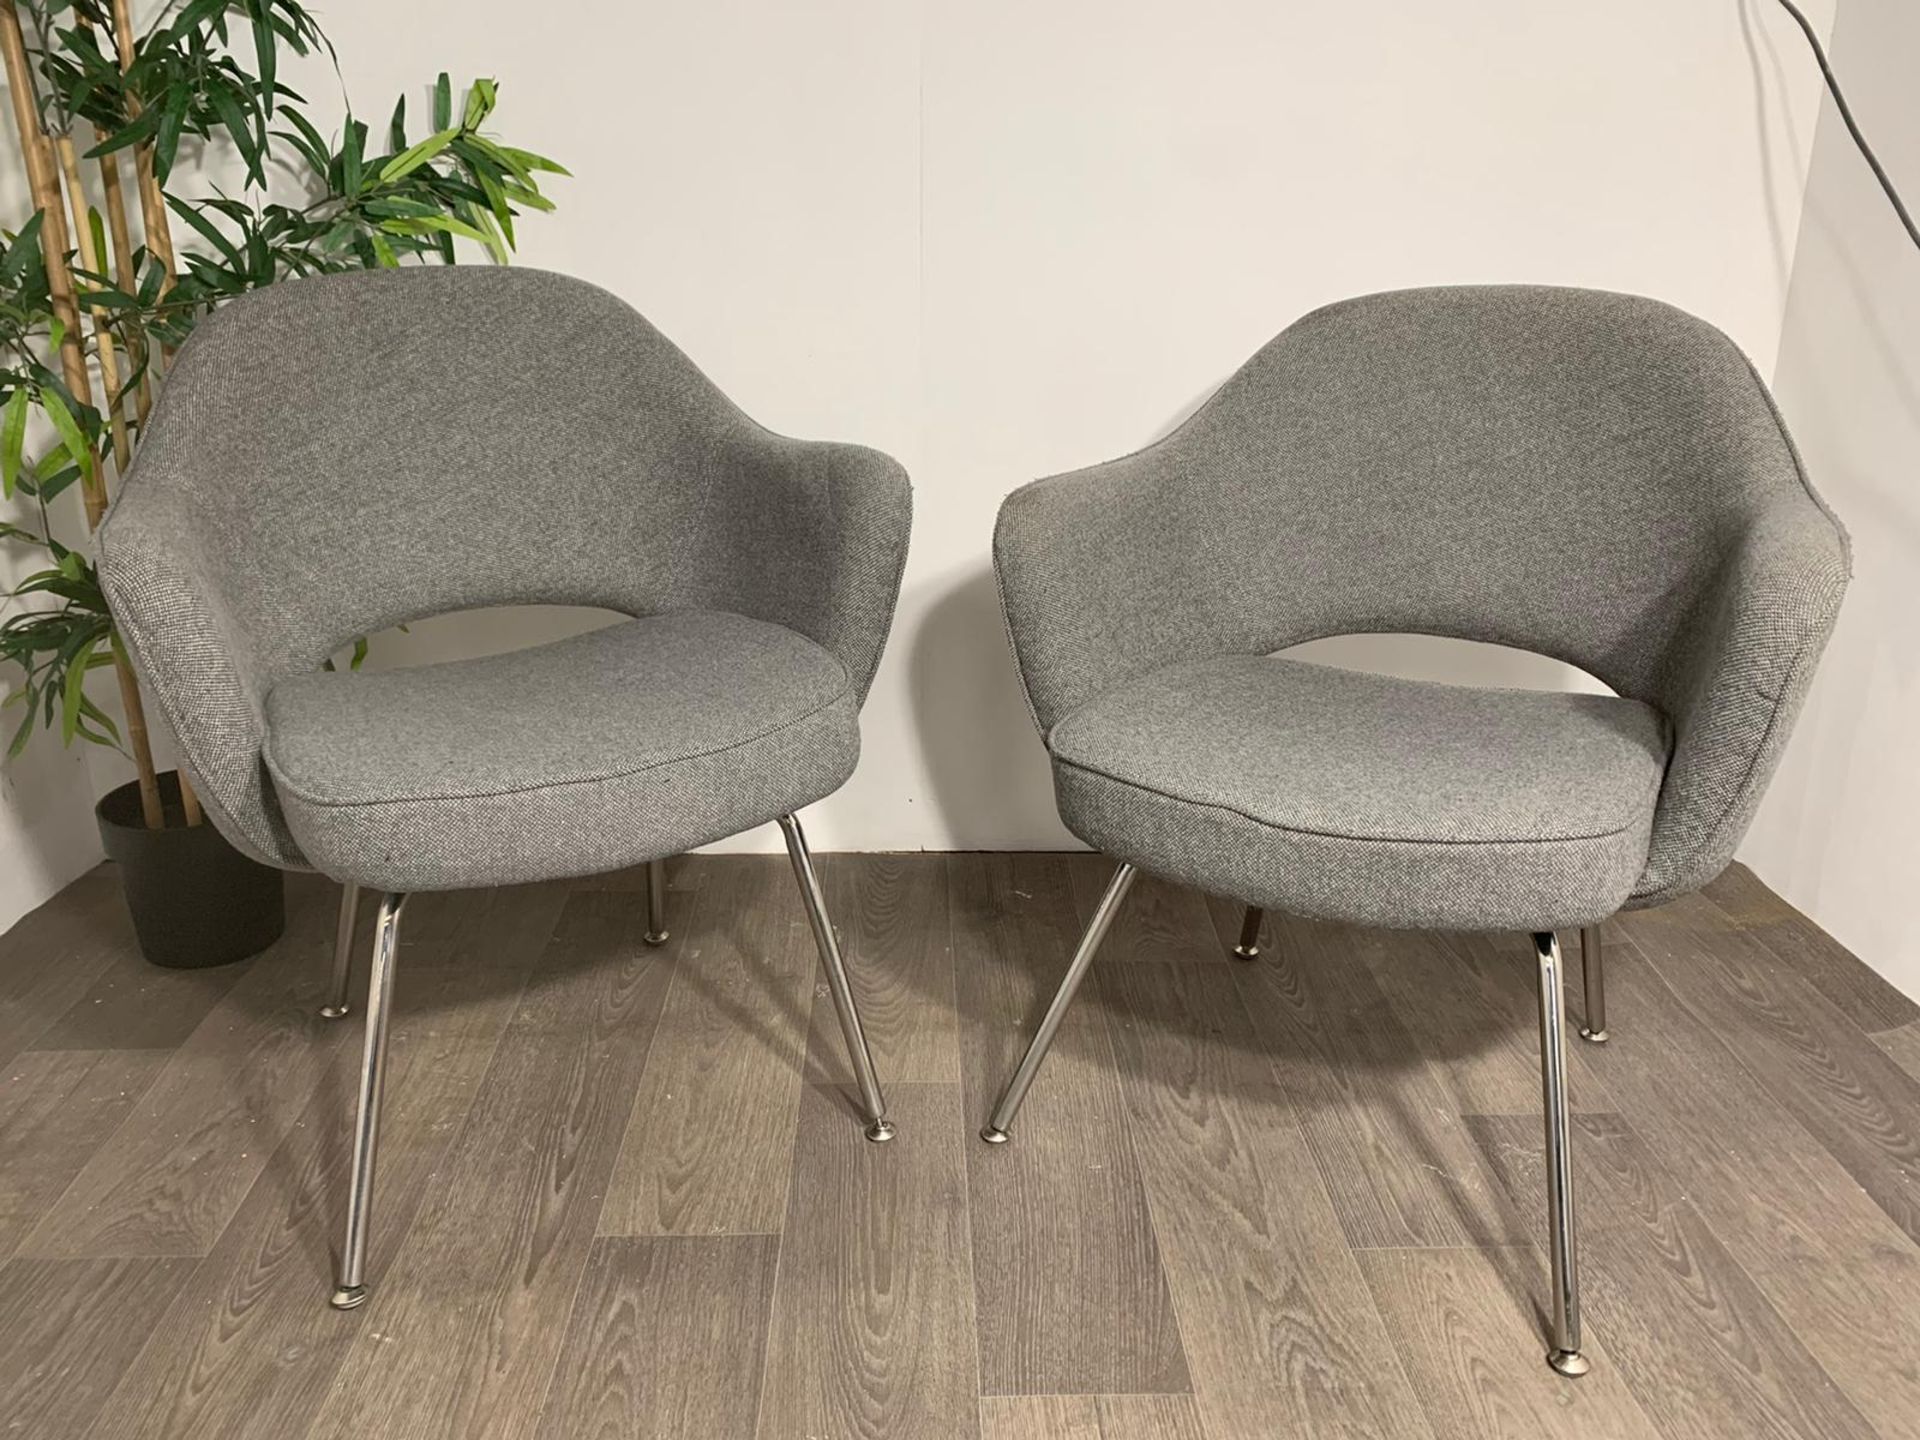 Grey Fabric Commercial Grade Chair with Chrome Legs x2 - Image 6 of 8